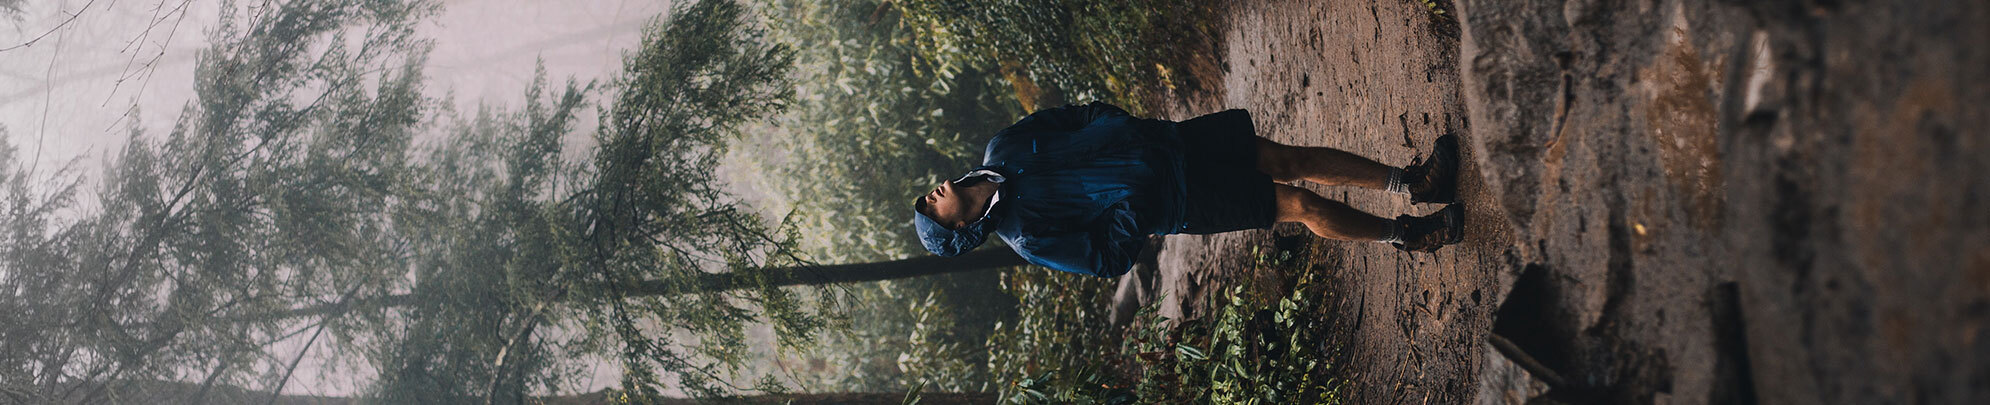 Man wearing raincoat and hiking boots looking up at the sky in a foggy forest